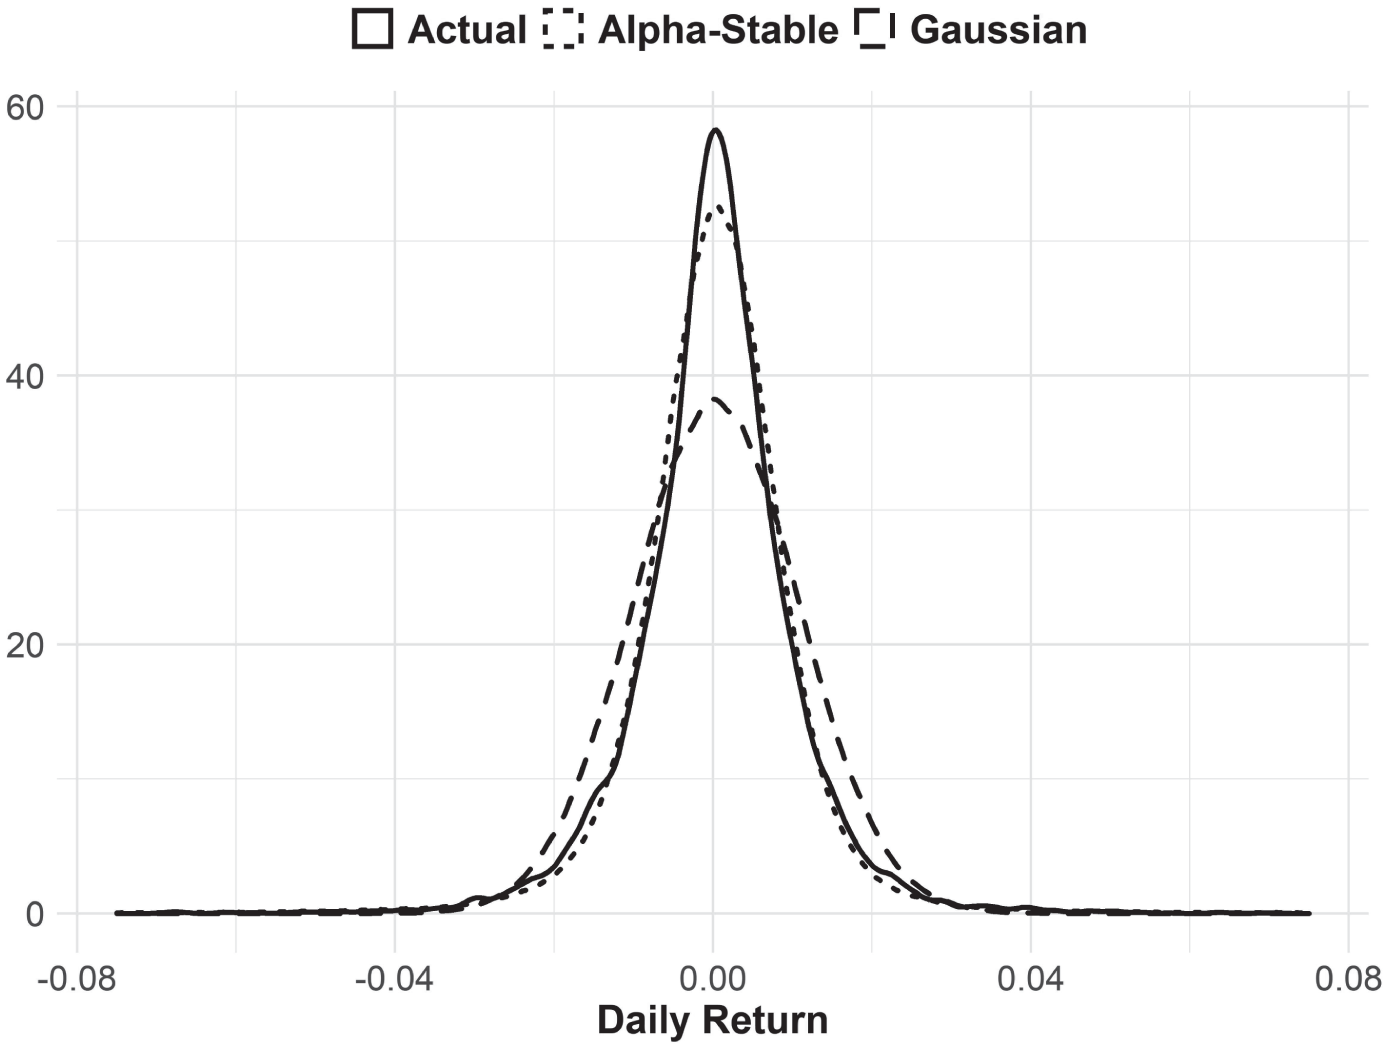 Schematic illustration of Daily S&P 500 Returns Compared to Alpha-Stable and Gaussian Distributions